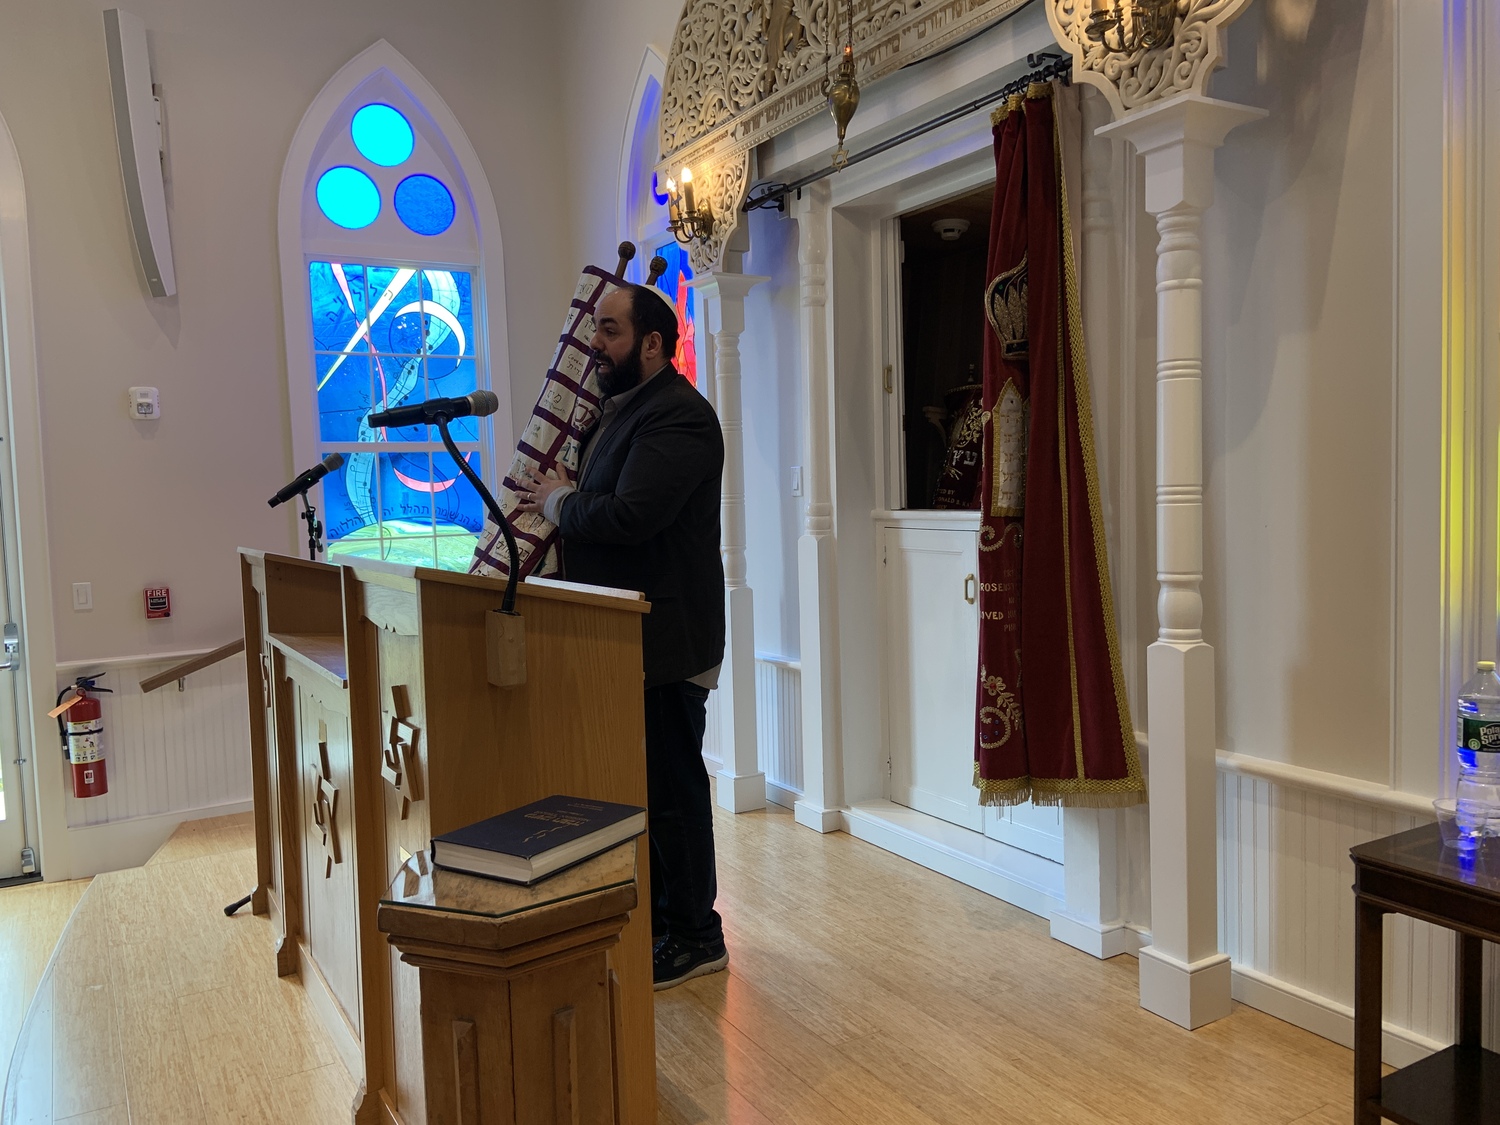 Rabbi Daniel Geffen in the sanctuary of Temple Adas Israel during a program on the history of the synagogue and the Jewish presence in Sag Harbor sponsored by the Sag Harbor Historical Museum. STEPHEN J. KOTZ